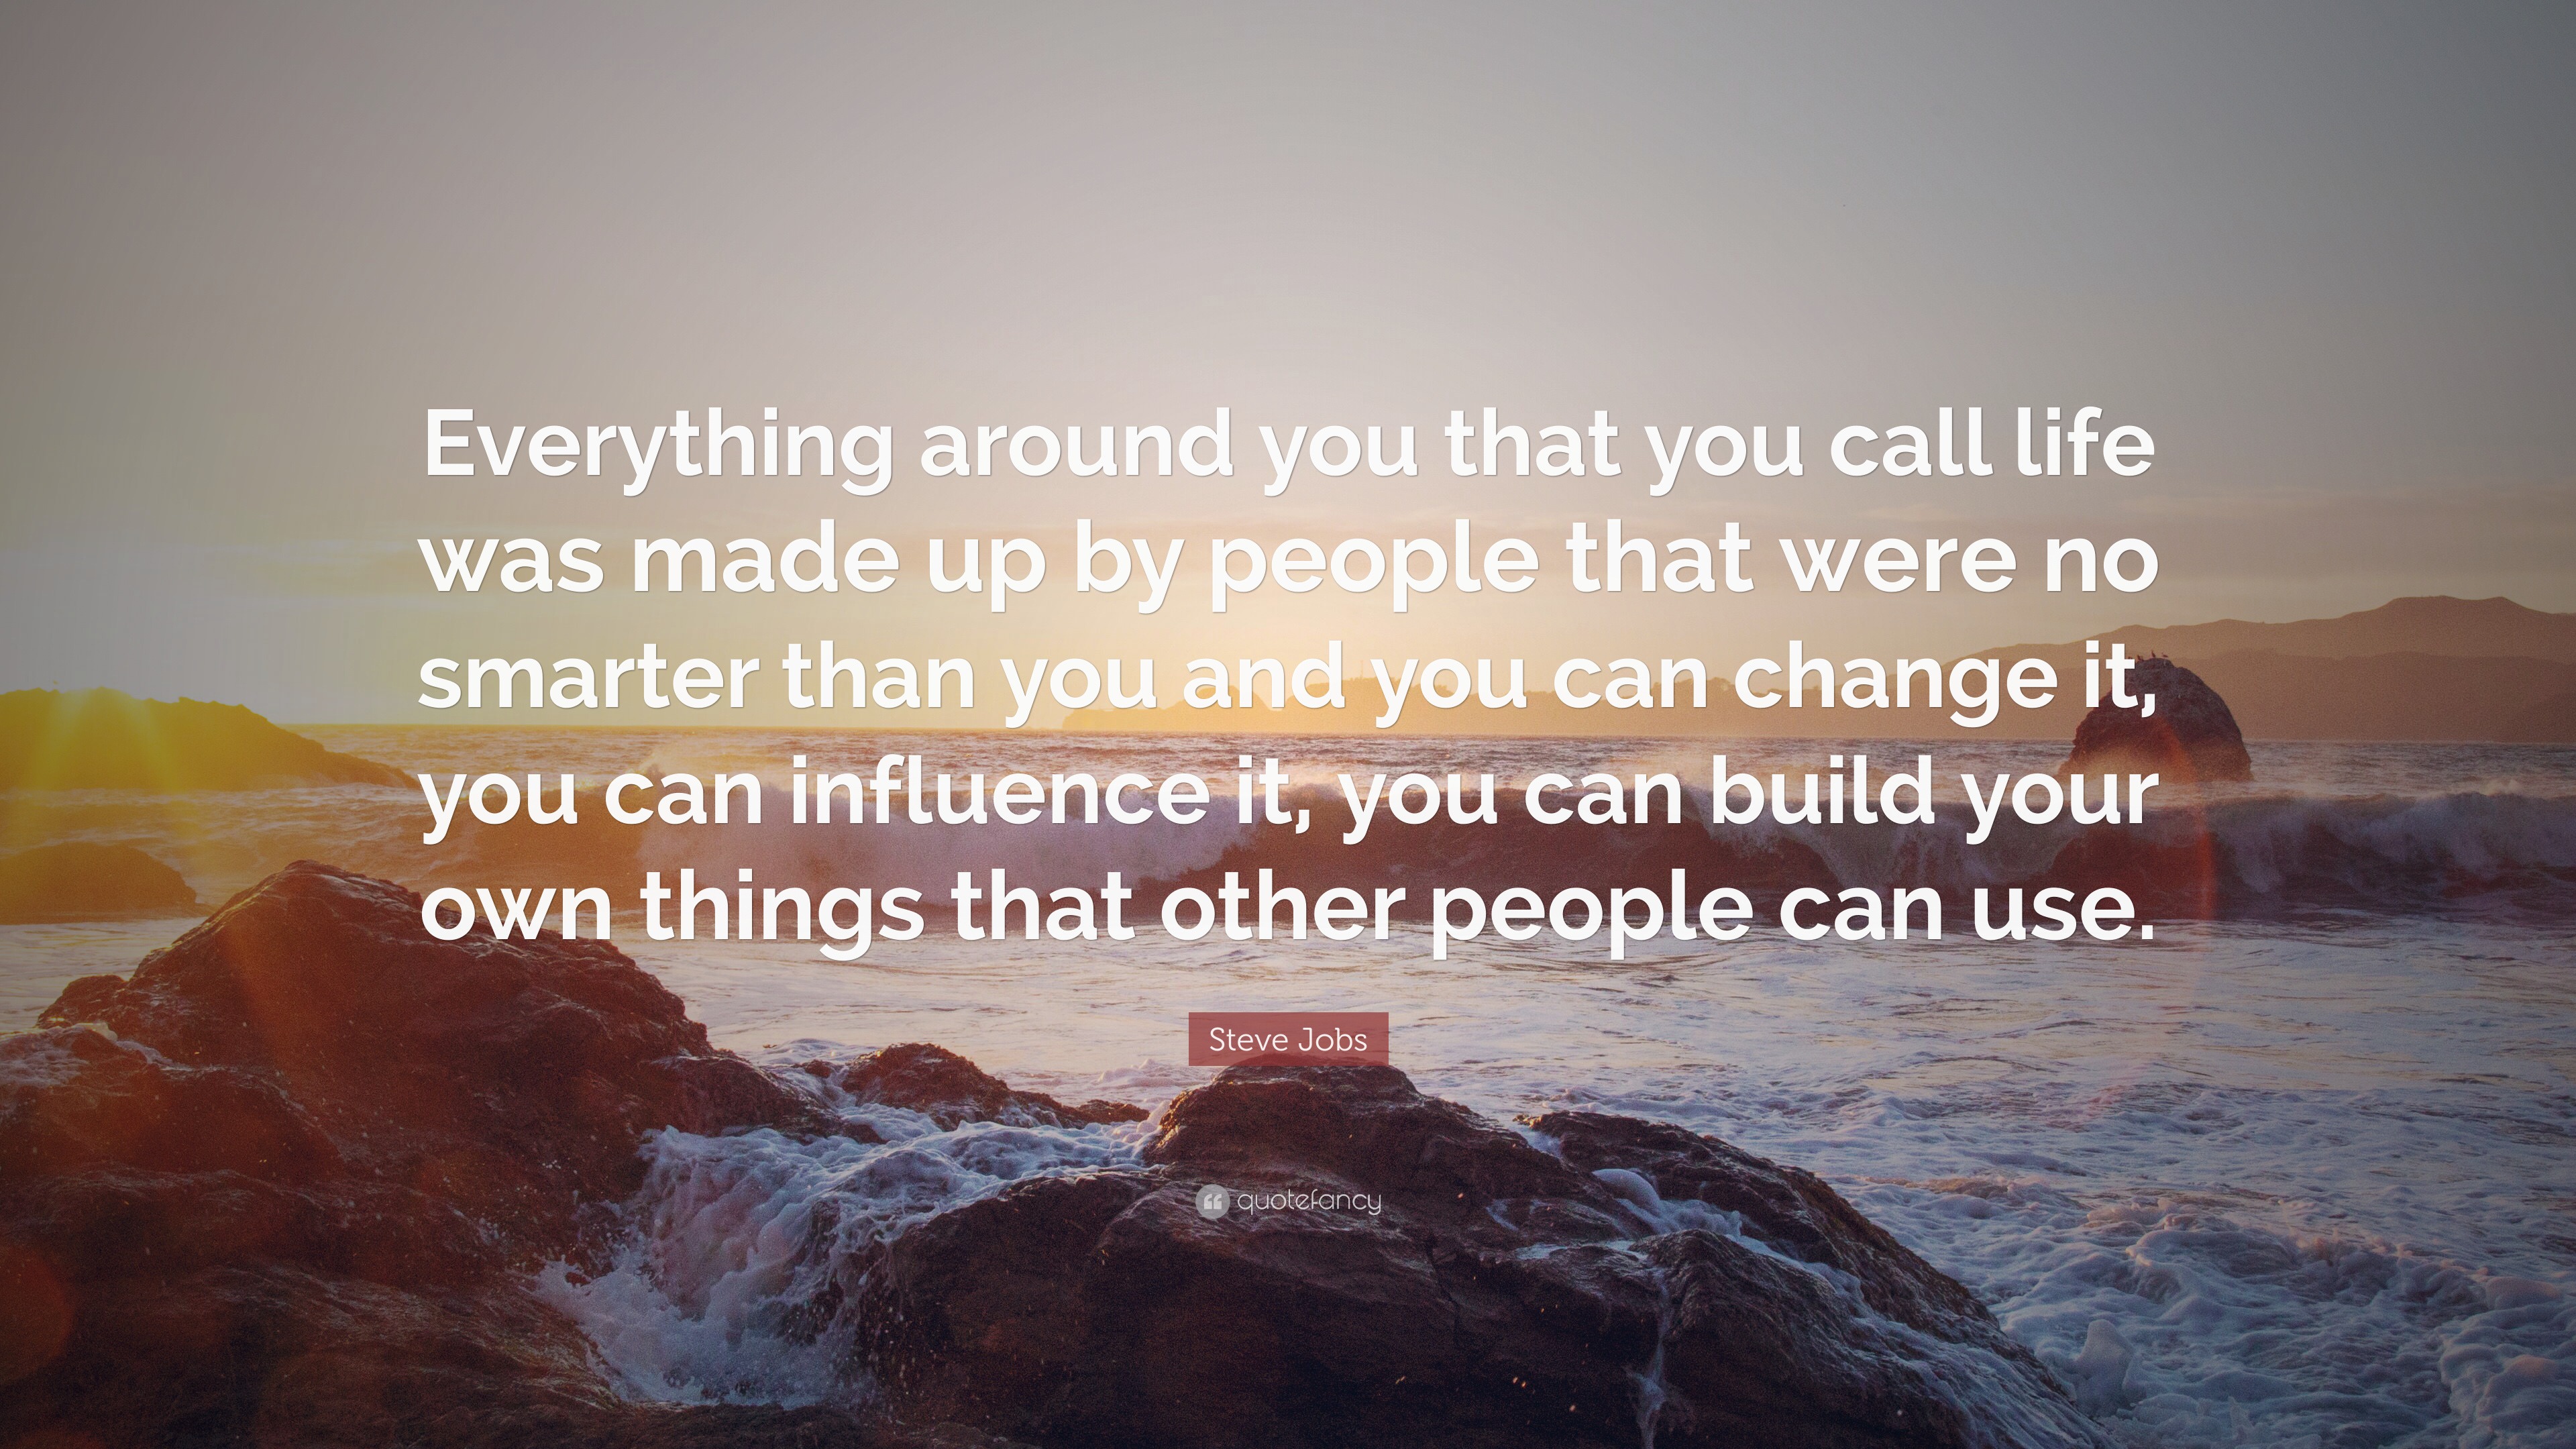 Steve Jobs Quote: “Everything around you that you call life was made up ...